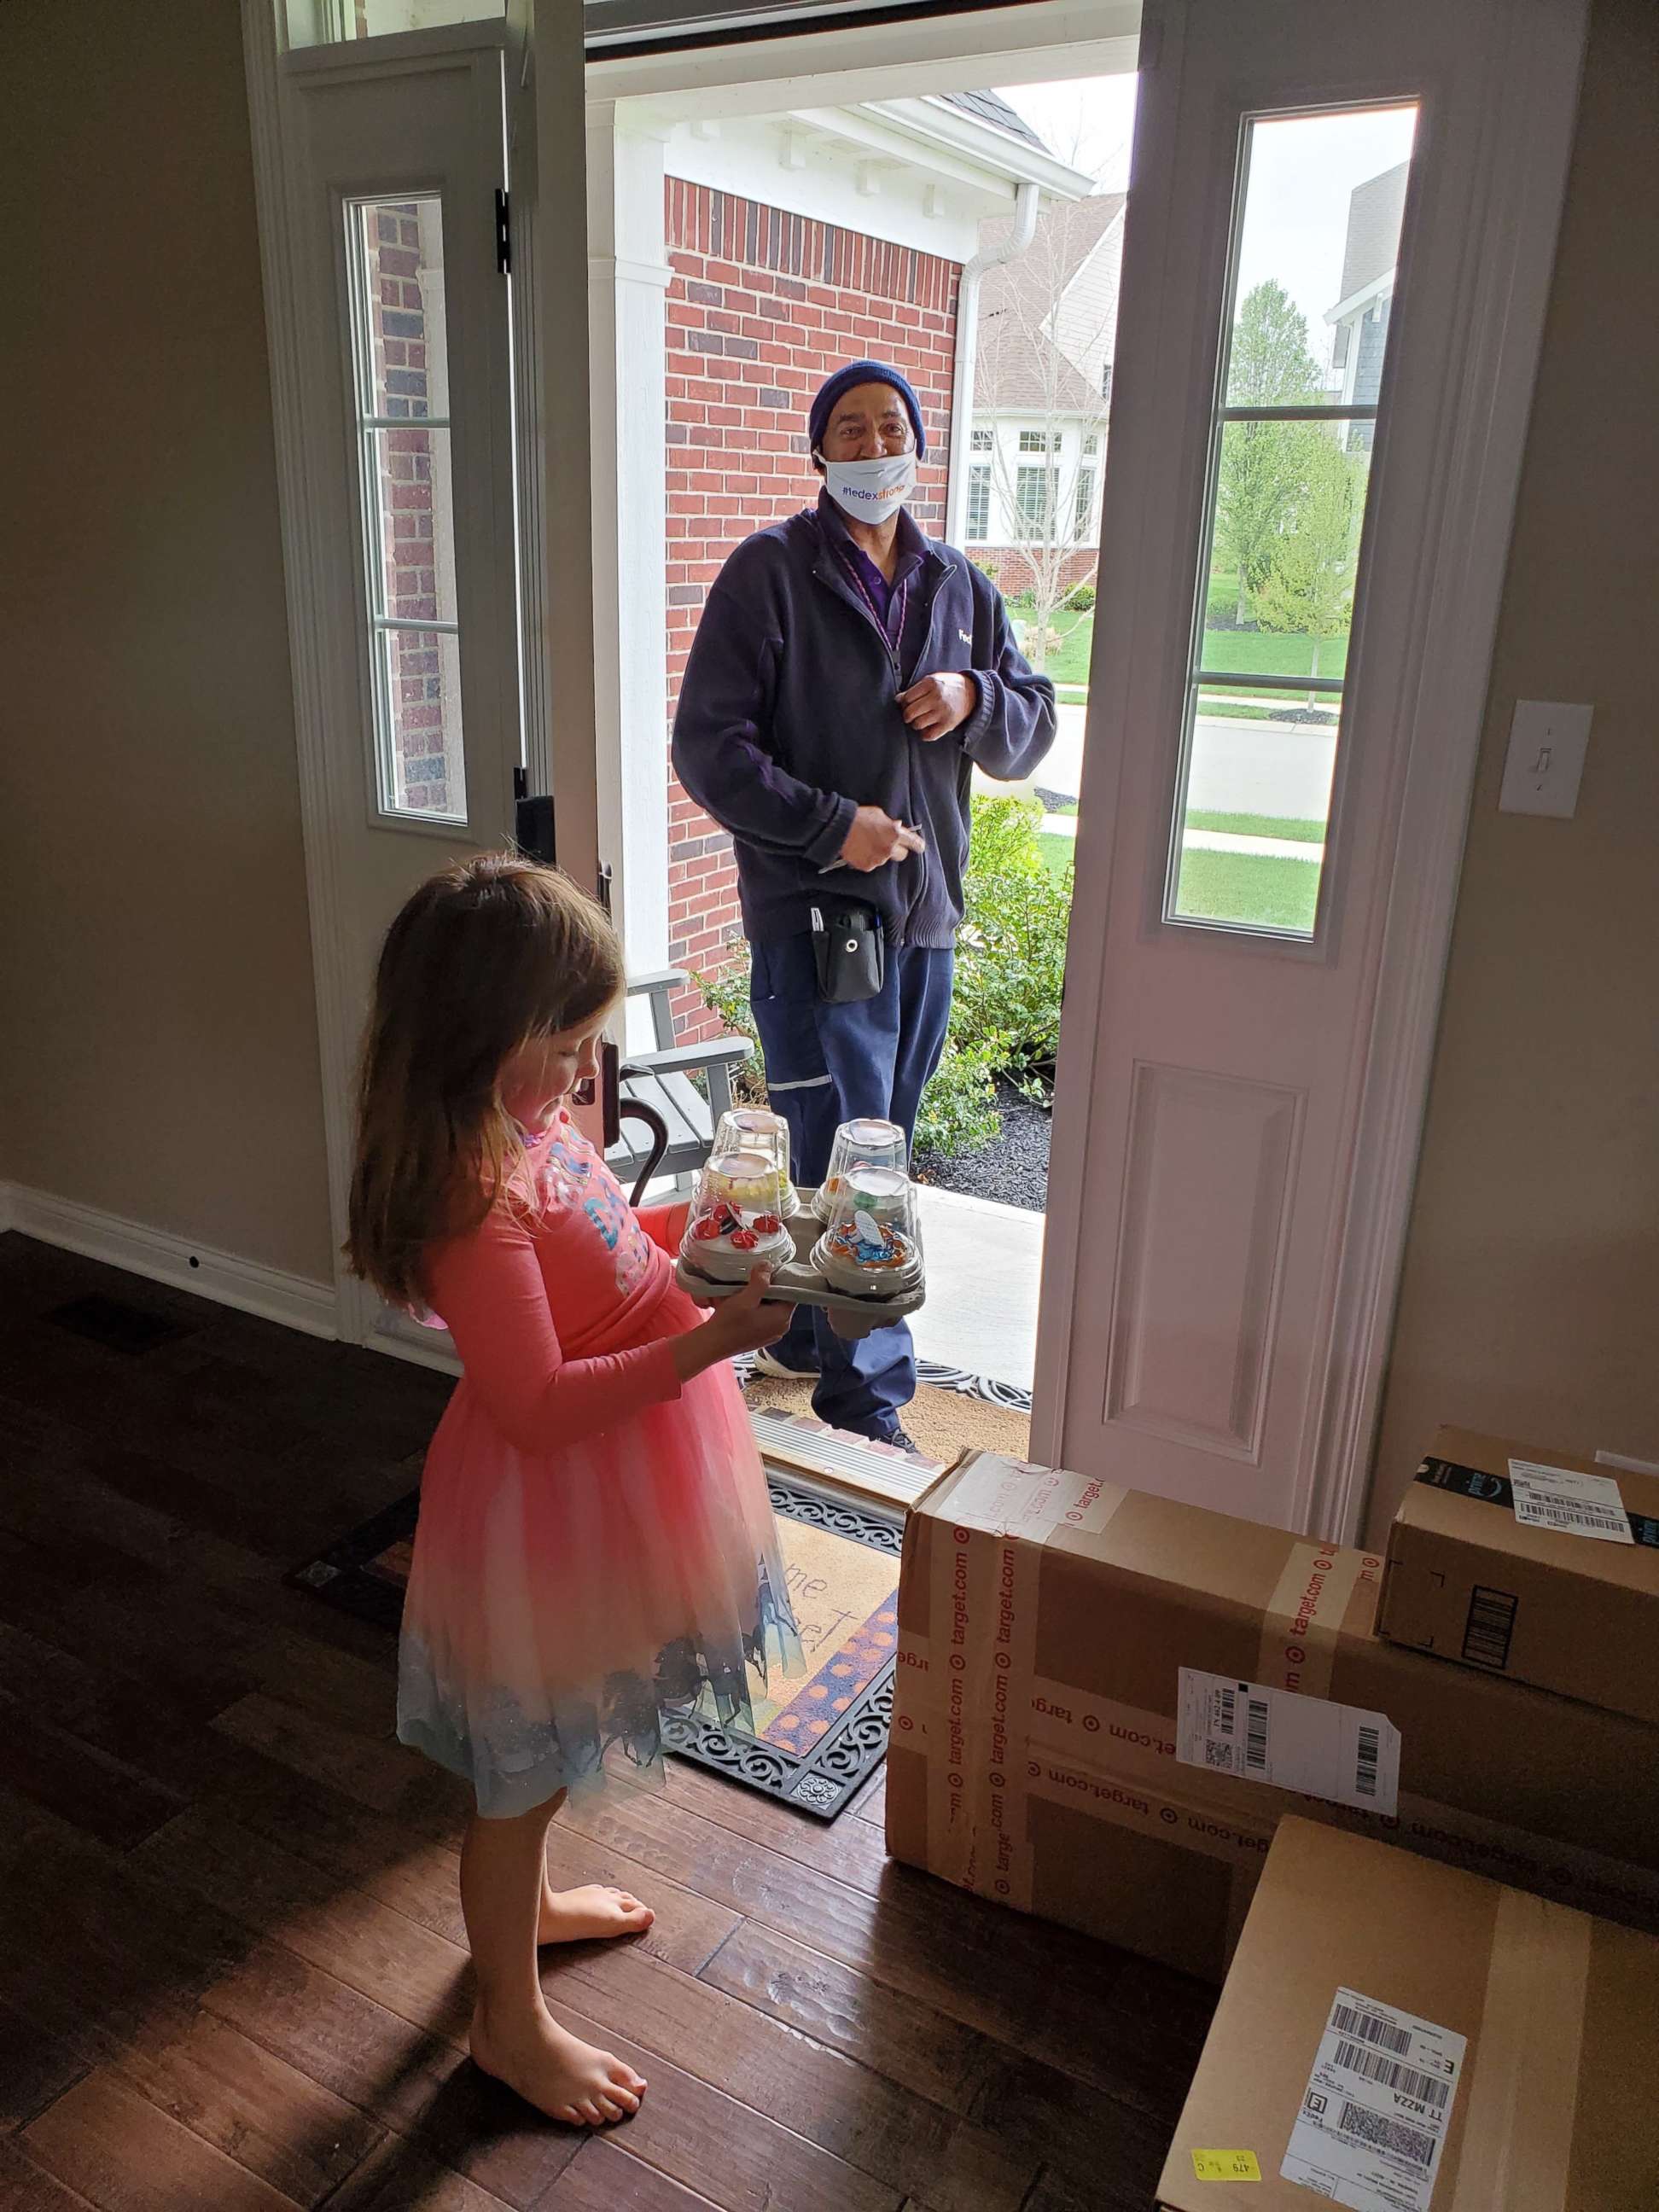 PHOTO: FedEx driver Jodan Price surprised 6-year-old Emma Paternoster with cupcakes he bought after discovering it was her birthday.